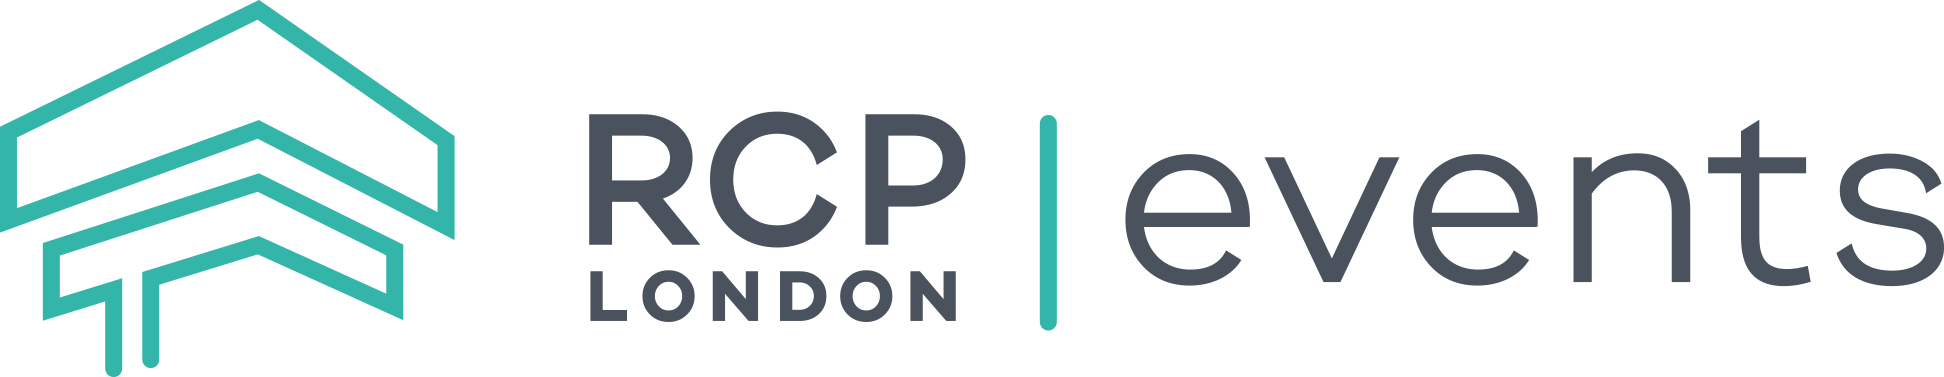 RCP London Events (Royal College of Physicians)